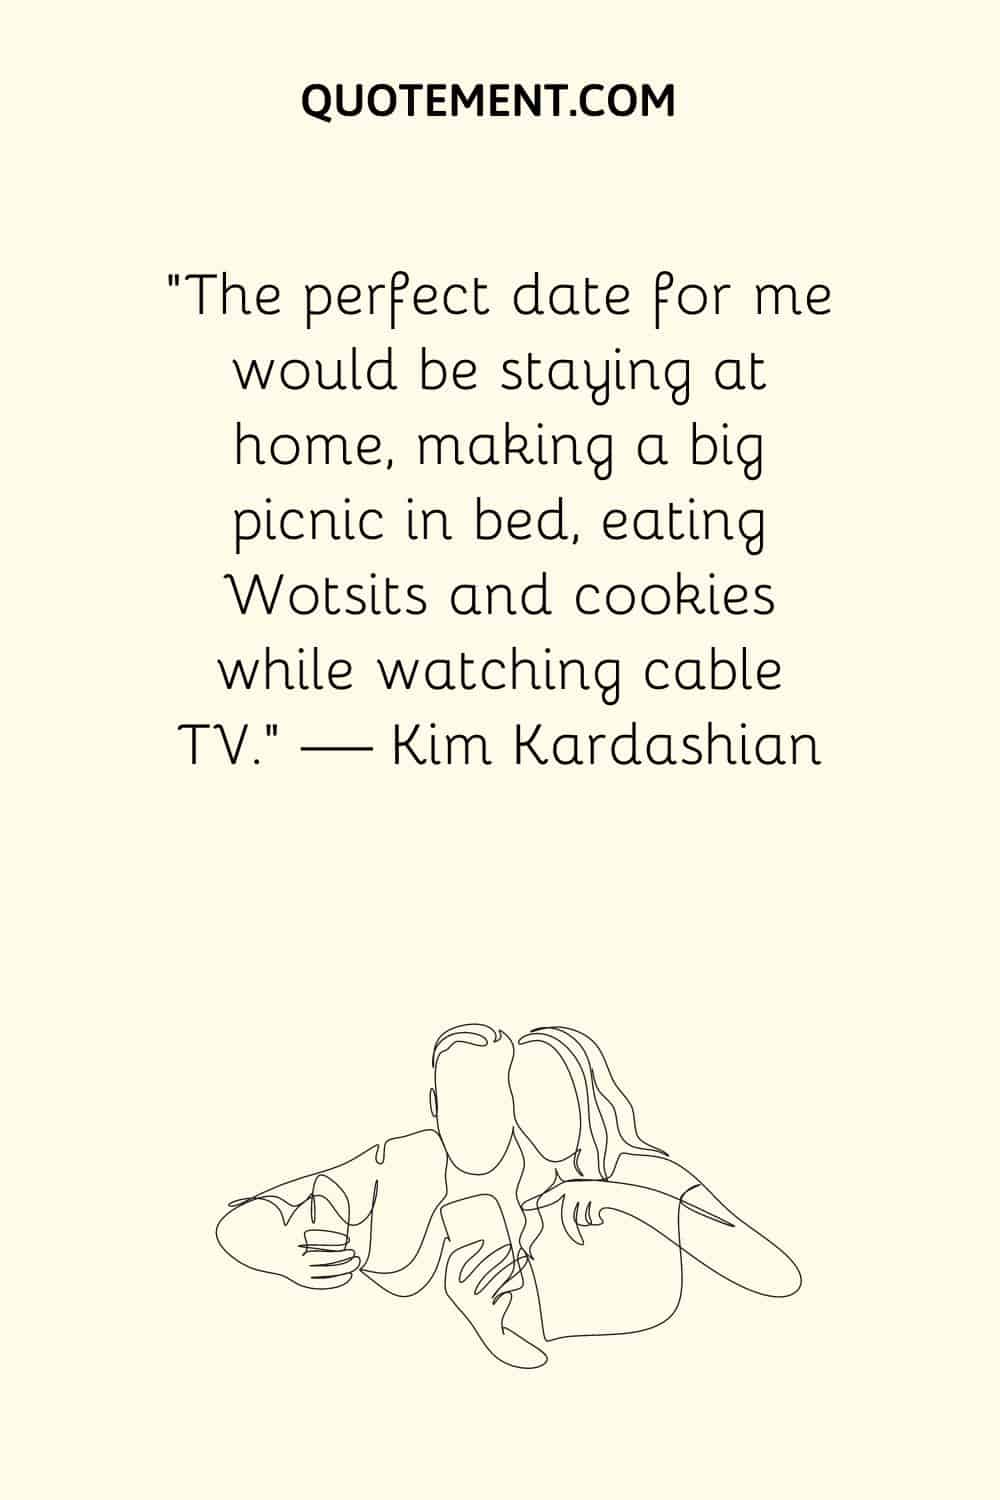 The perfect date for me would be staying at home, making a big picnic in bed, eating Wotsits and cookies while watching cable TV